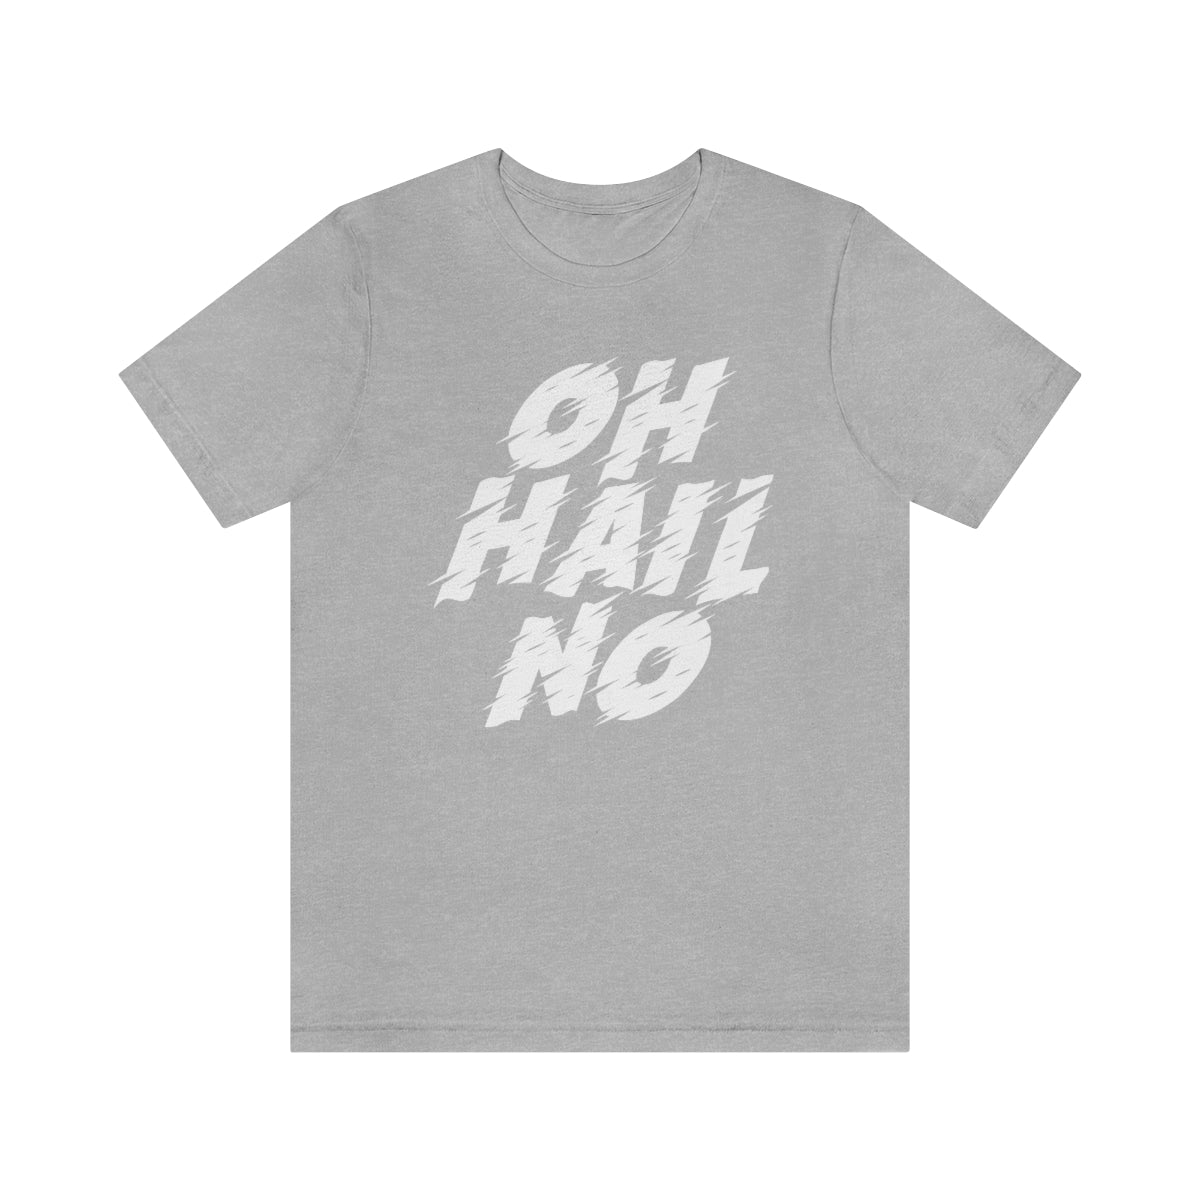 Oh Hail – Helicity Designs No Tee